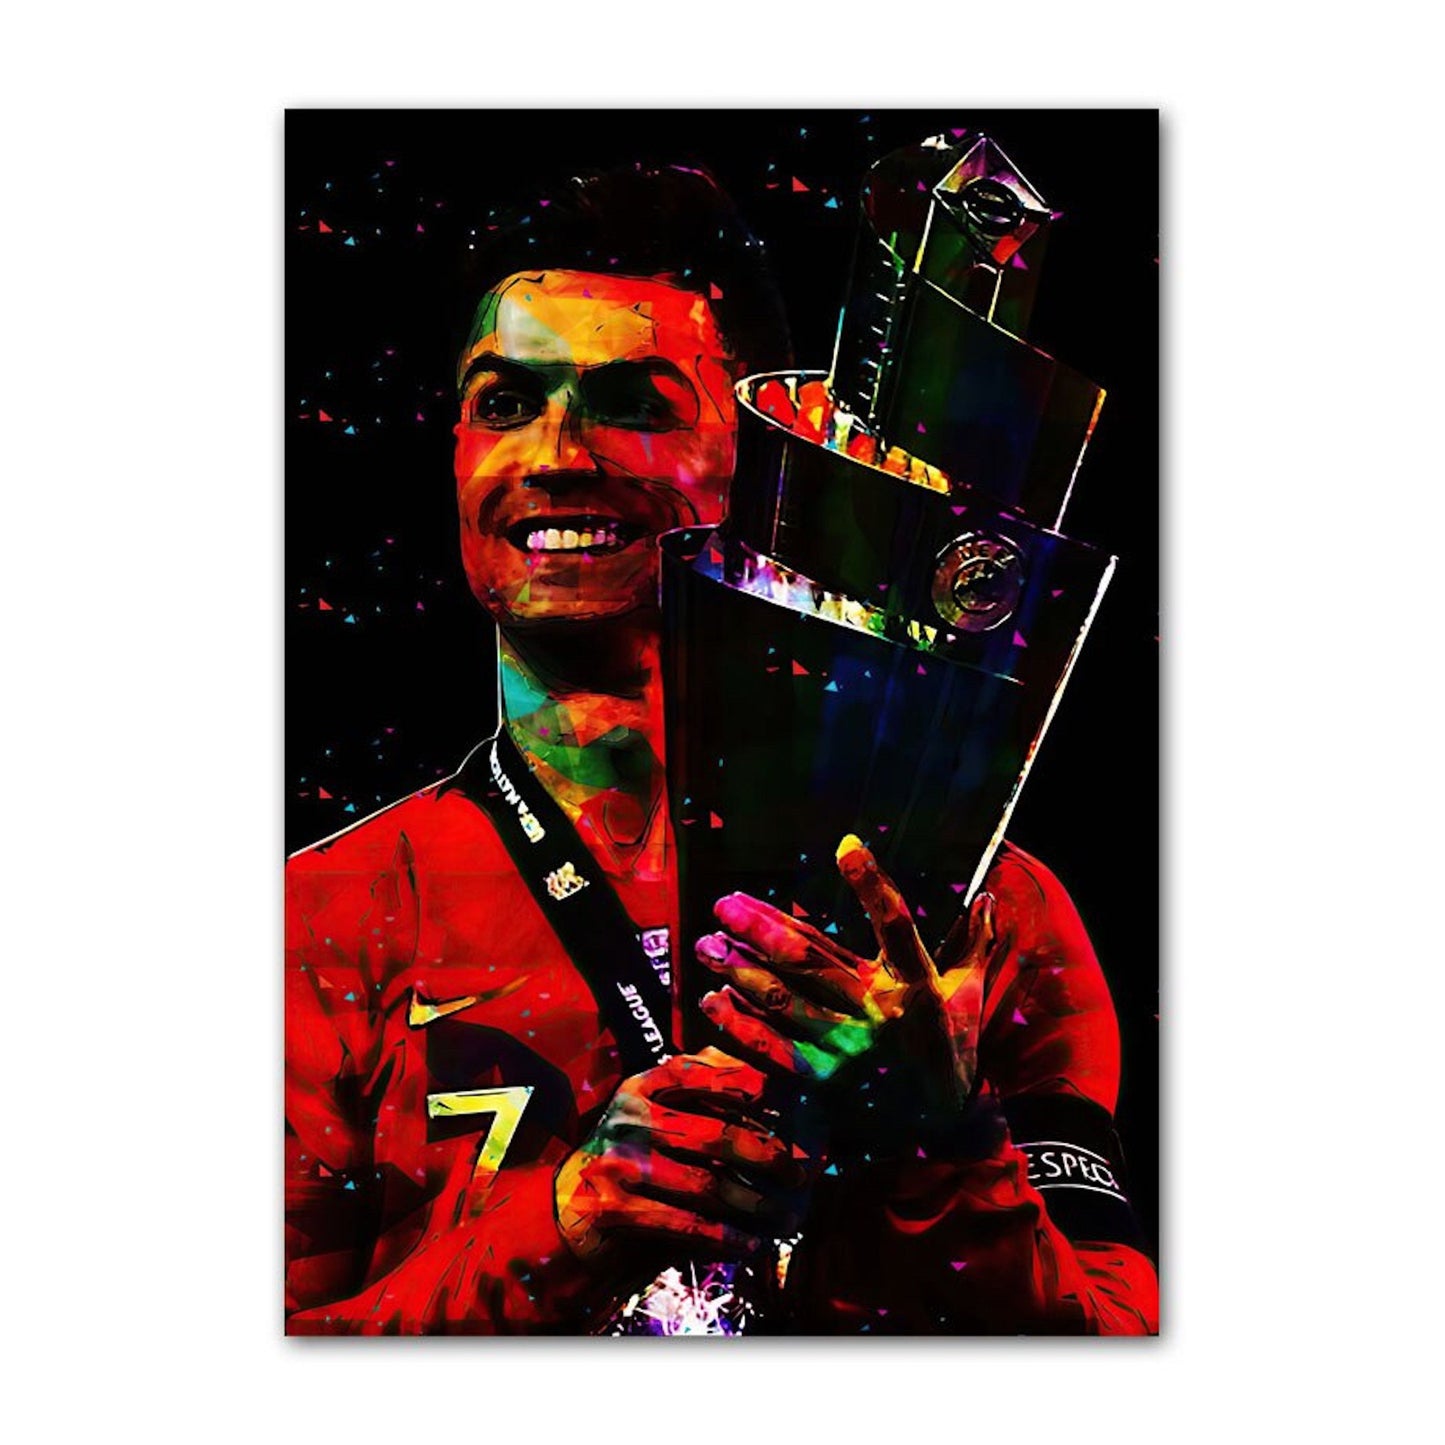 Poster football Christiano Ronaldo at Manchester United best moments as a decorative print without a frame